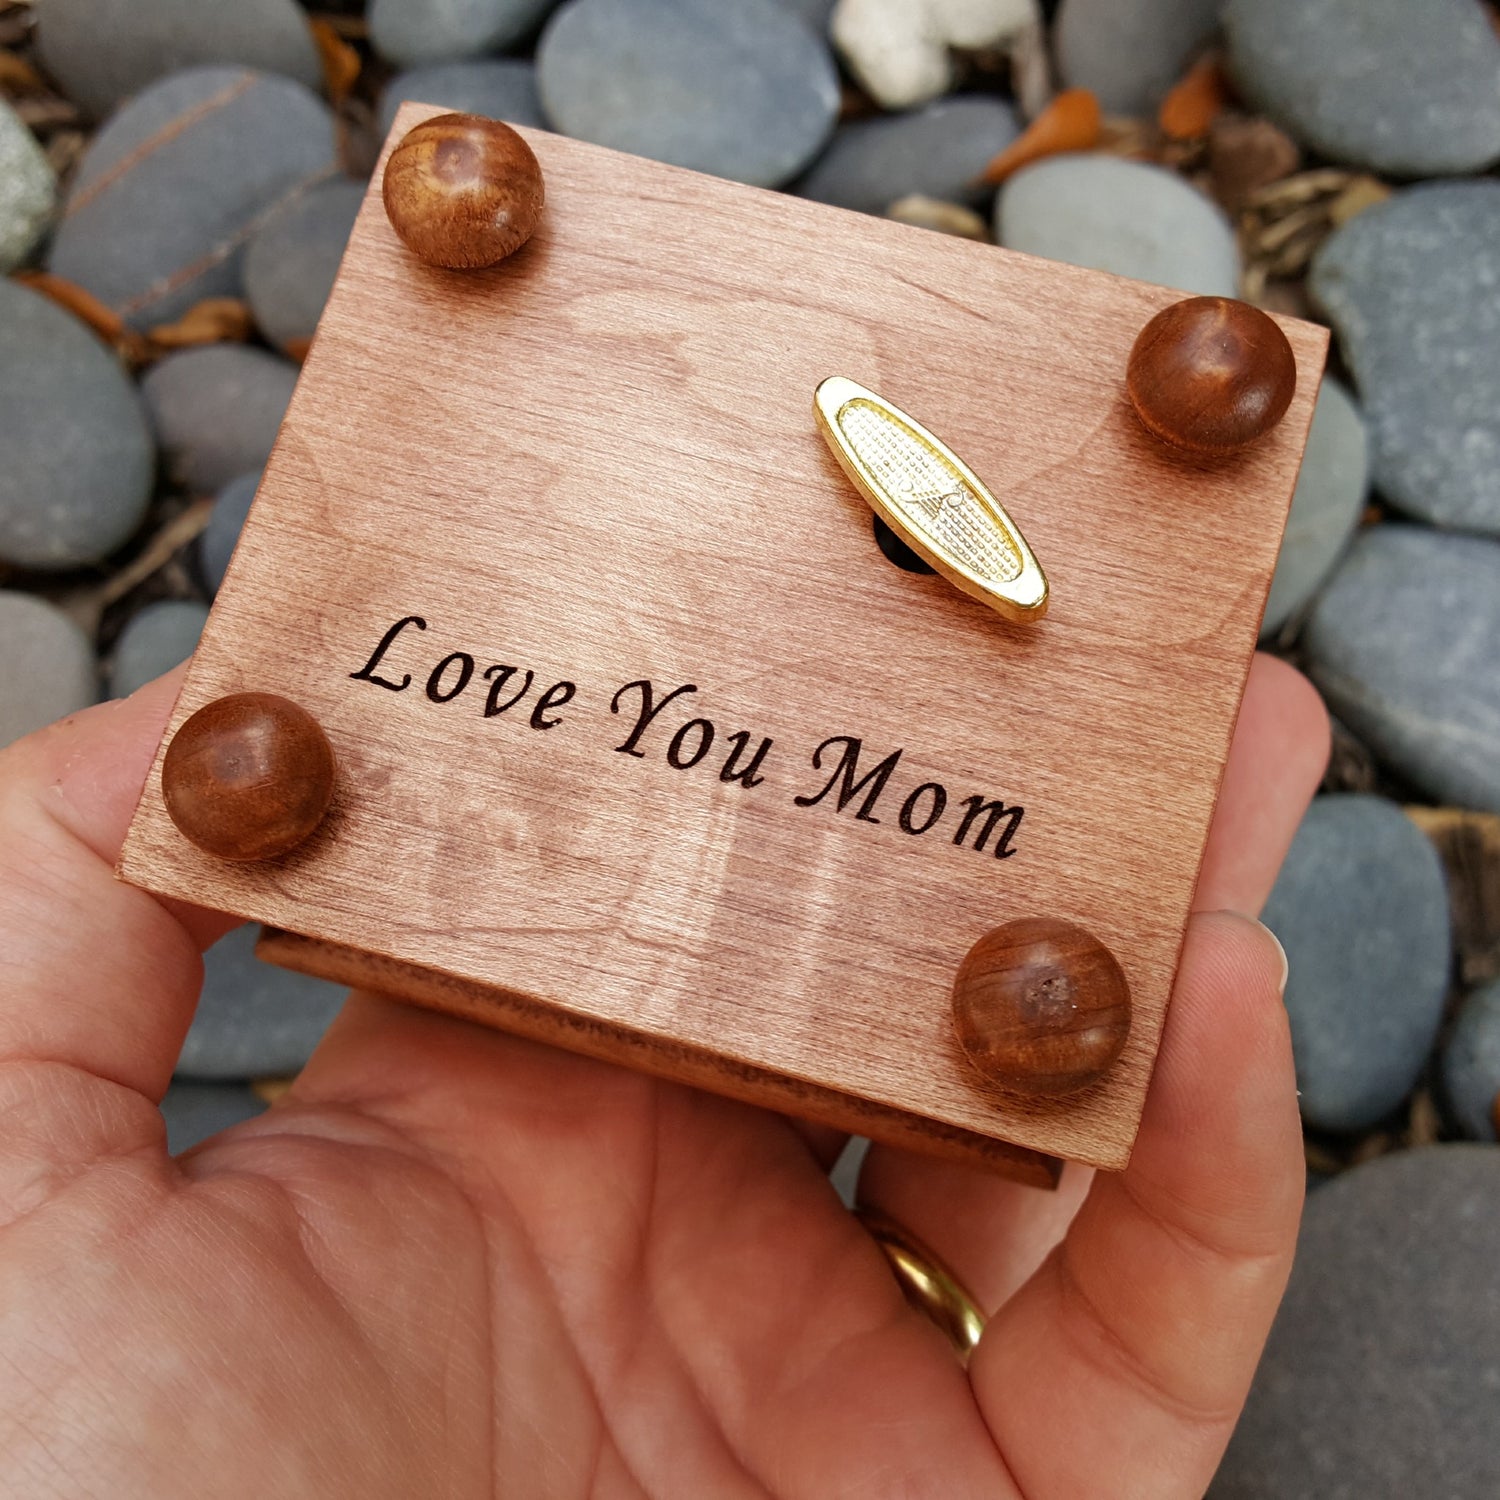 Music box personalized engraving Love You Mom